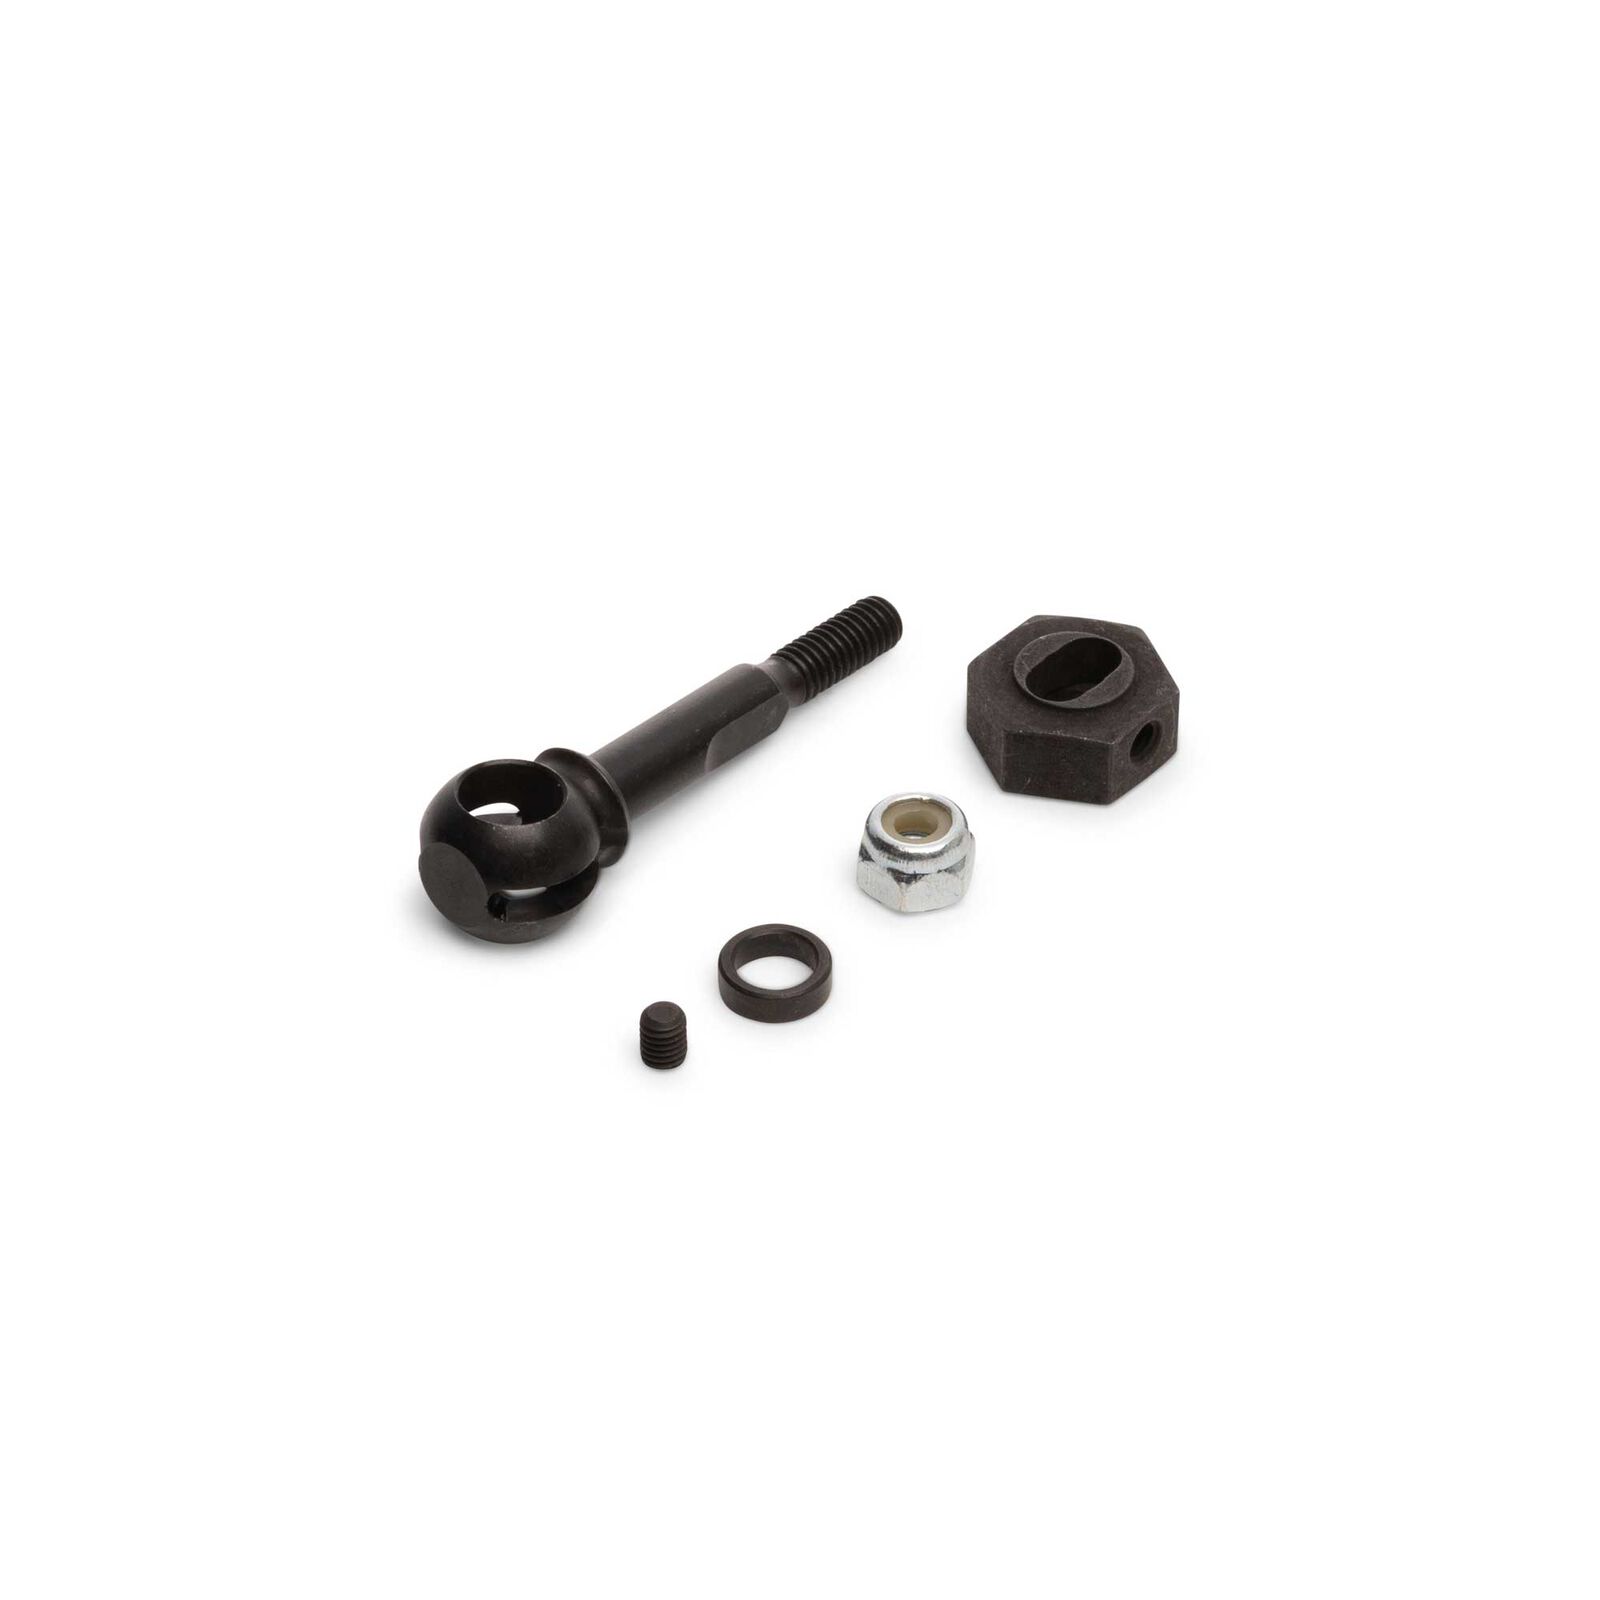 X-Duty CVD Axle 10mm Offset With 5mm Bearing